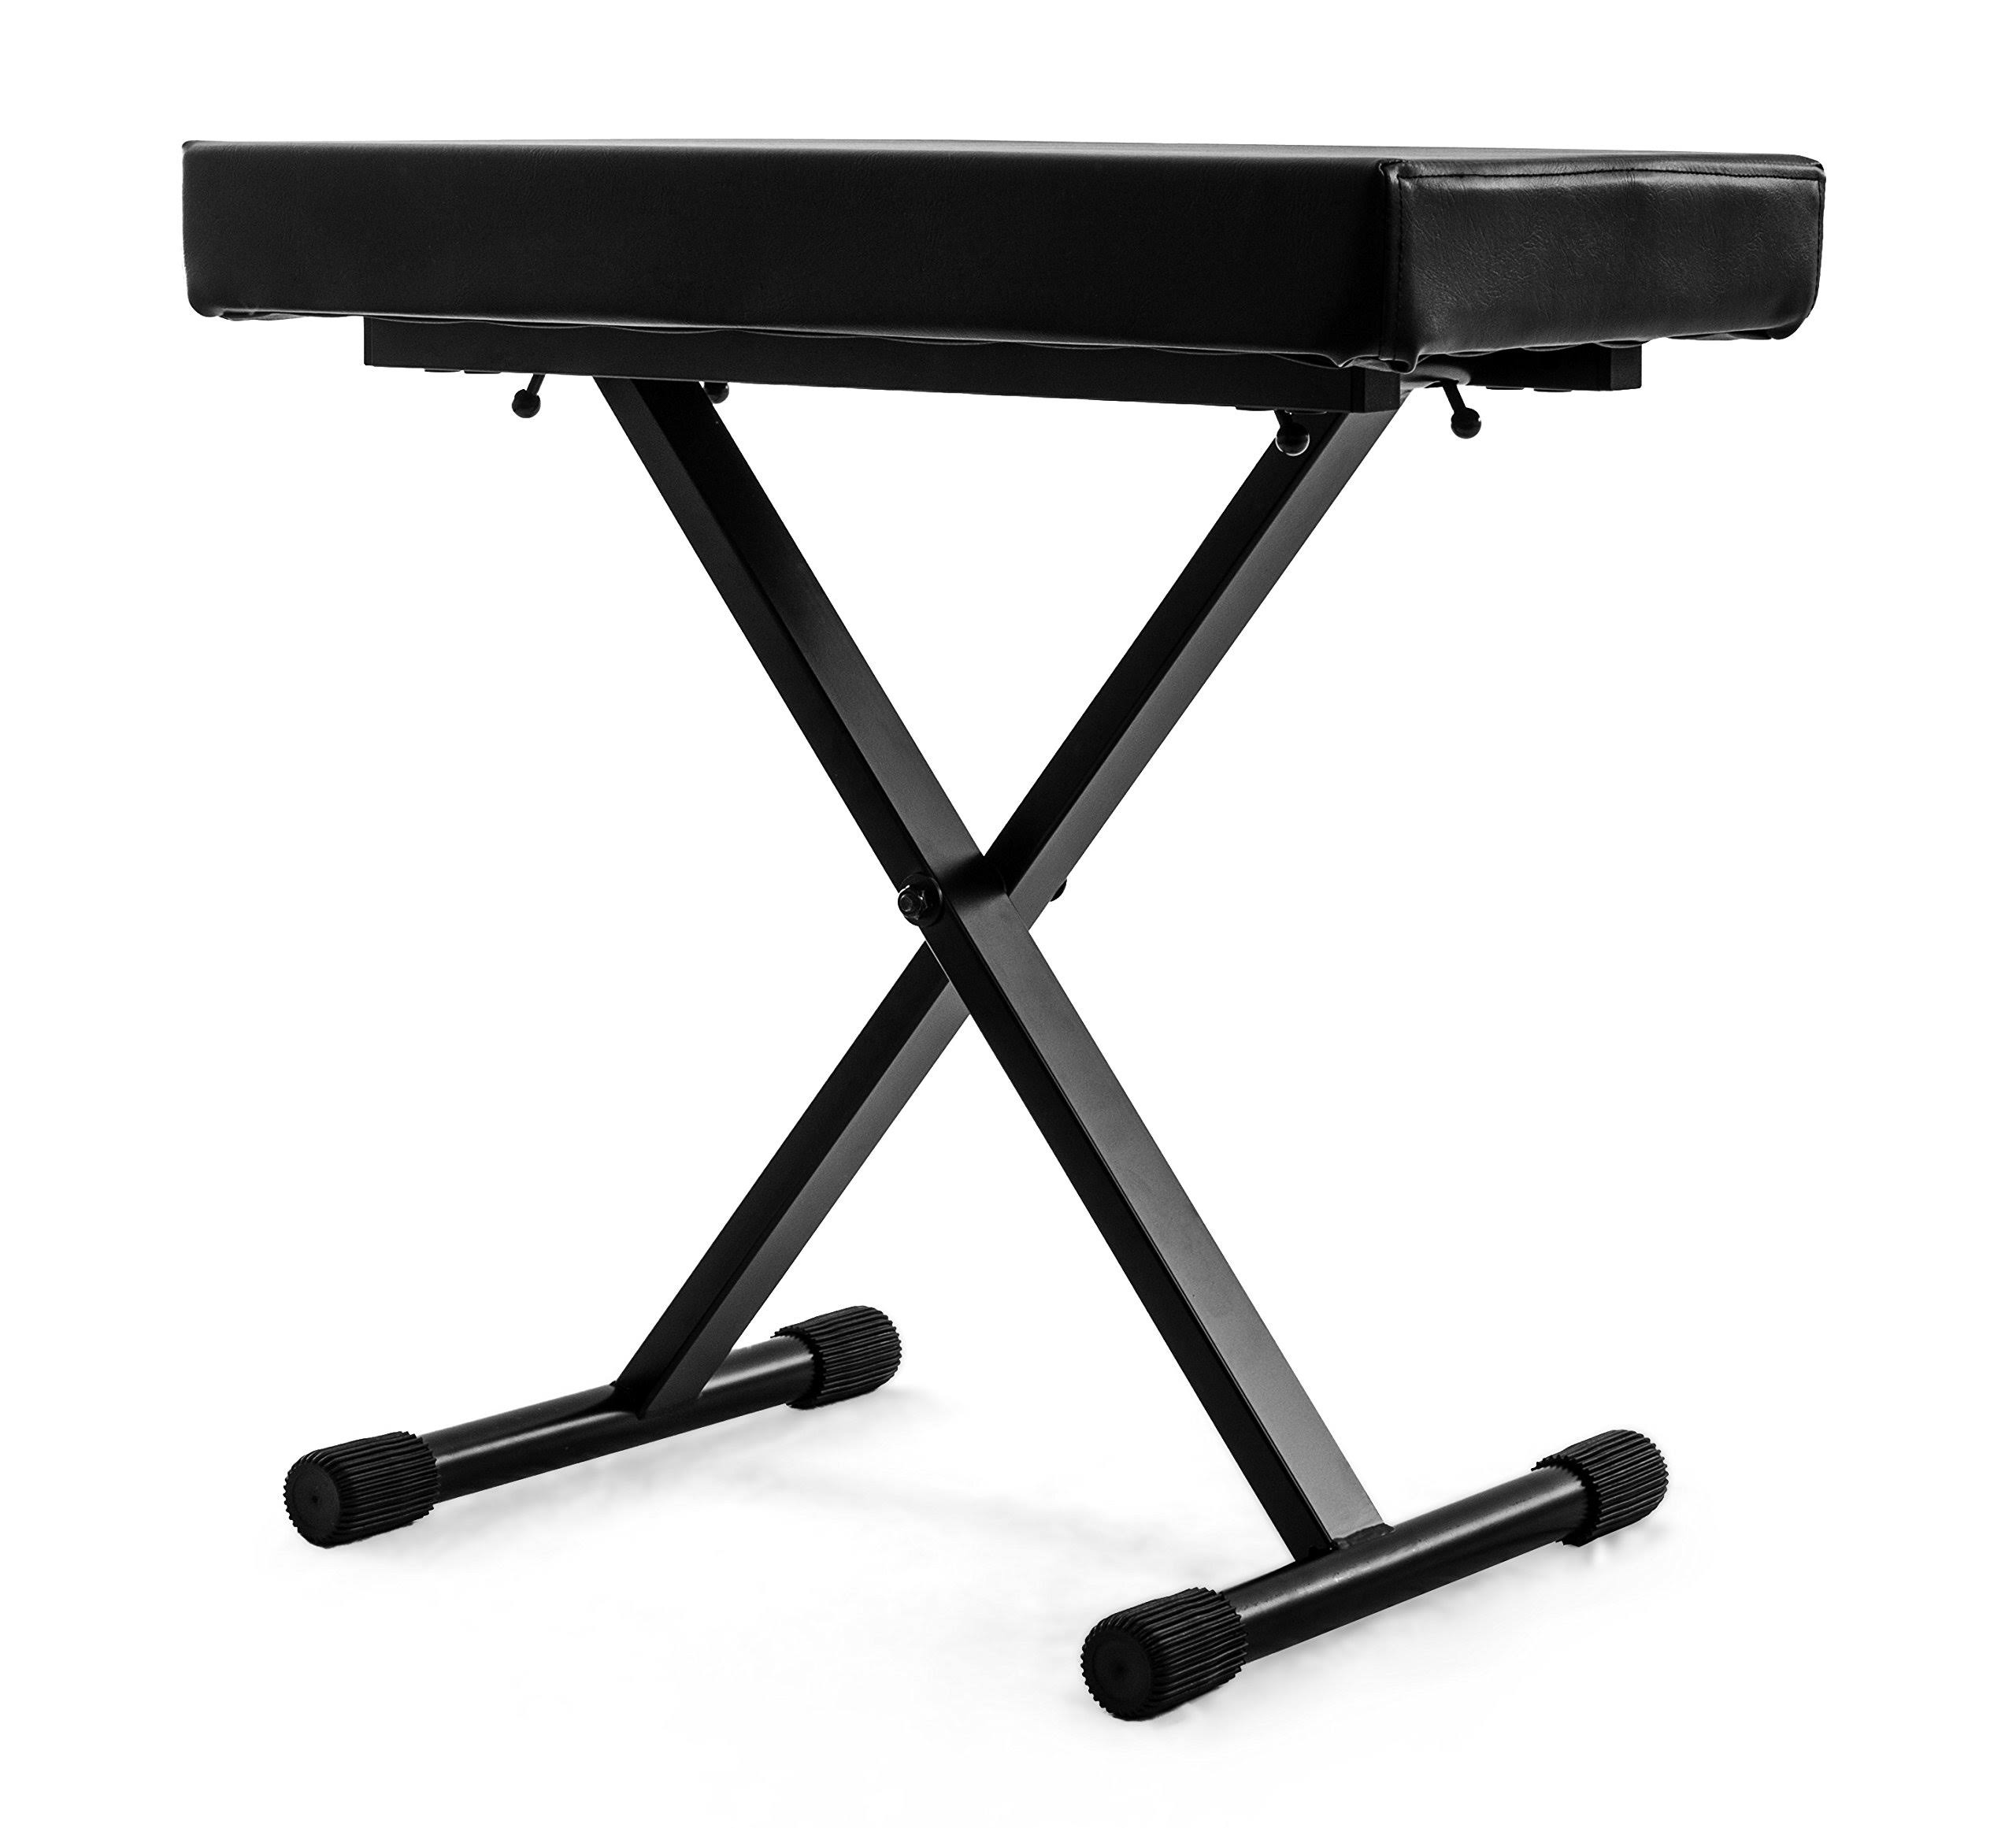 Nomad Nkb-5505 Deluxe X-style Keyboard Bench - With 265lbs Weight Capacity